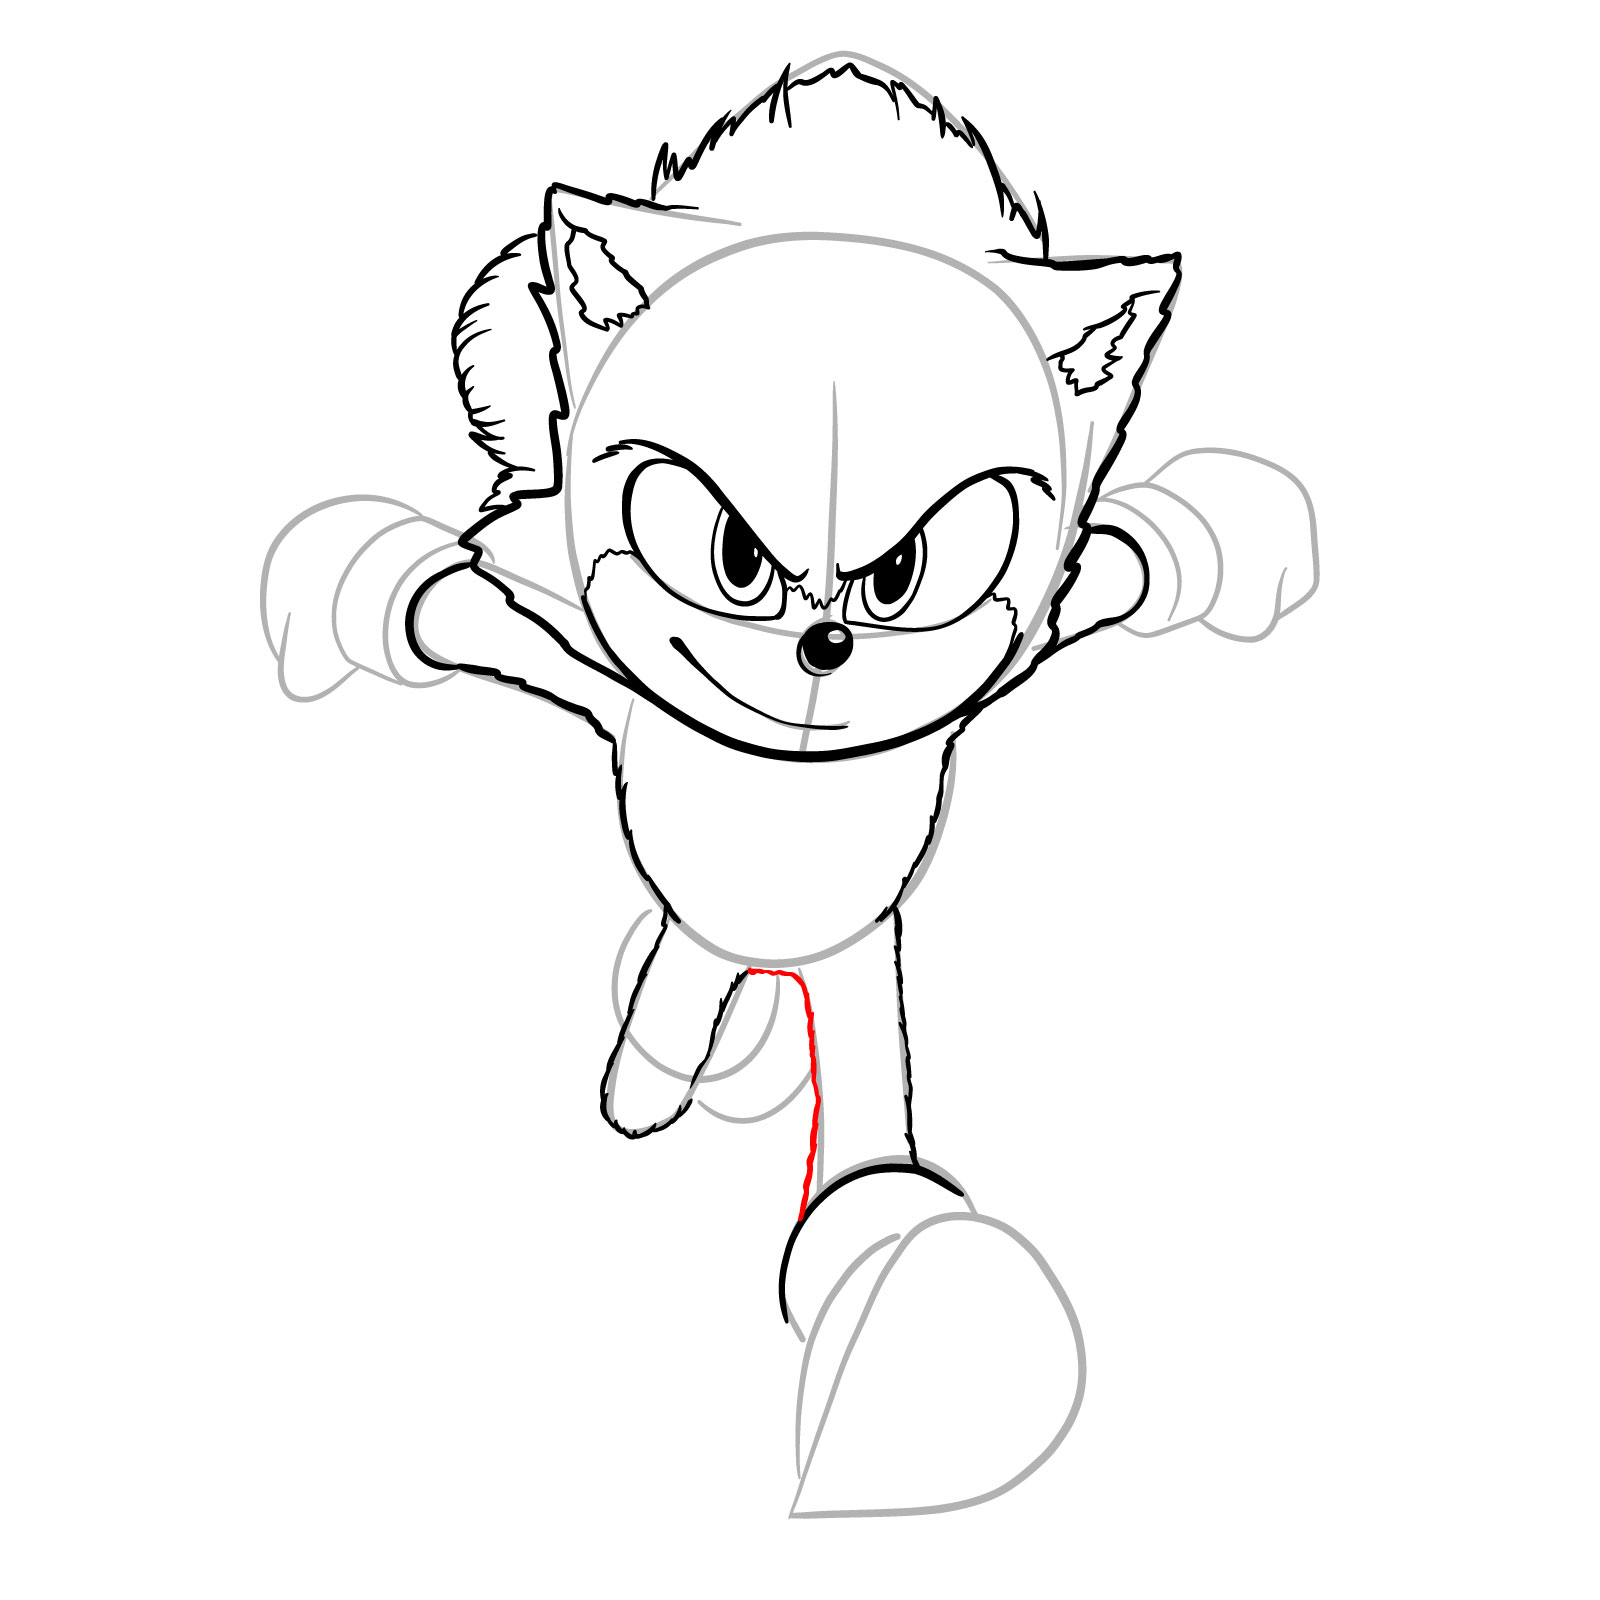 How to draw Sonic from the movie - step 19